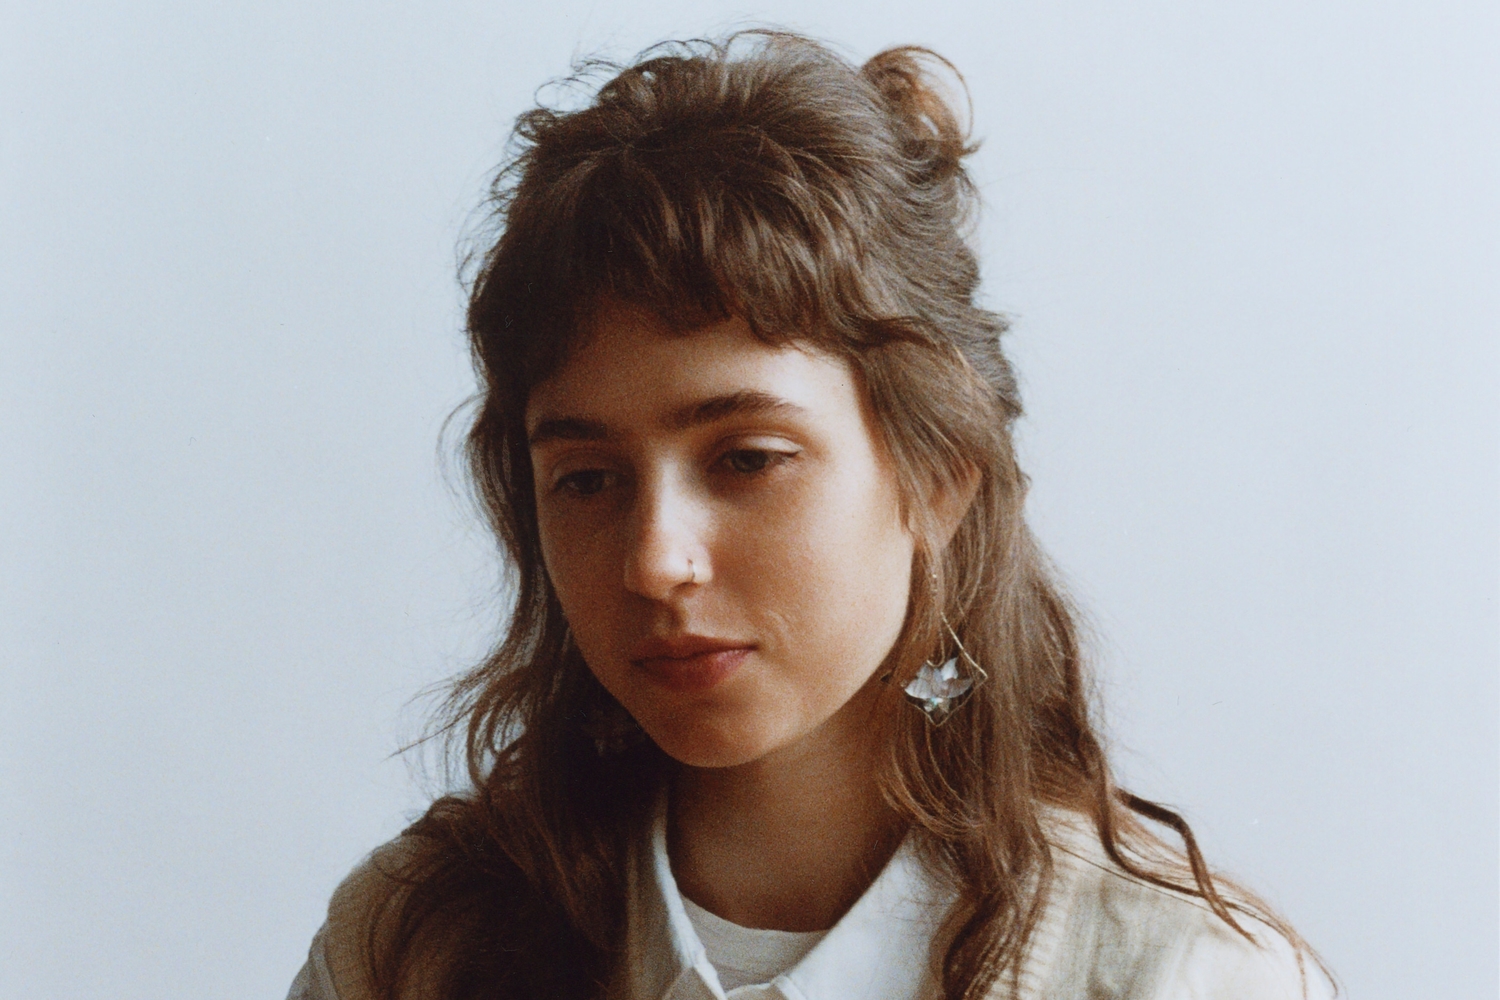 Clairo announces third album, 'Charm', and shares lead single 'Sexy To Someone'